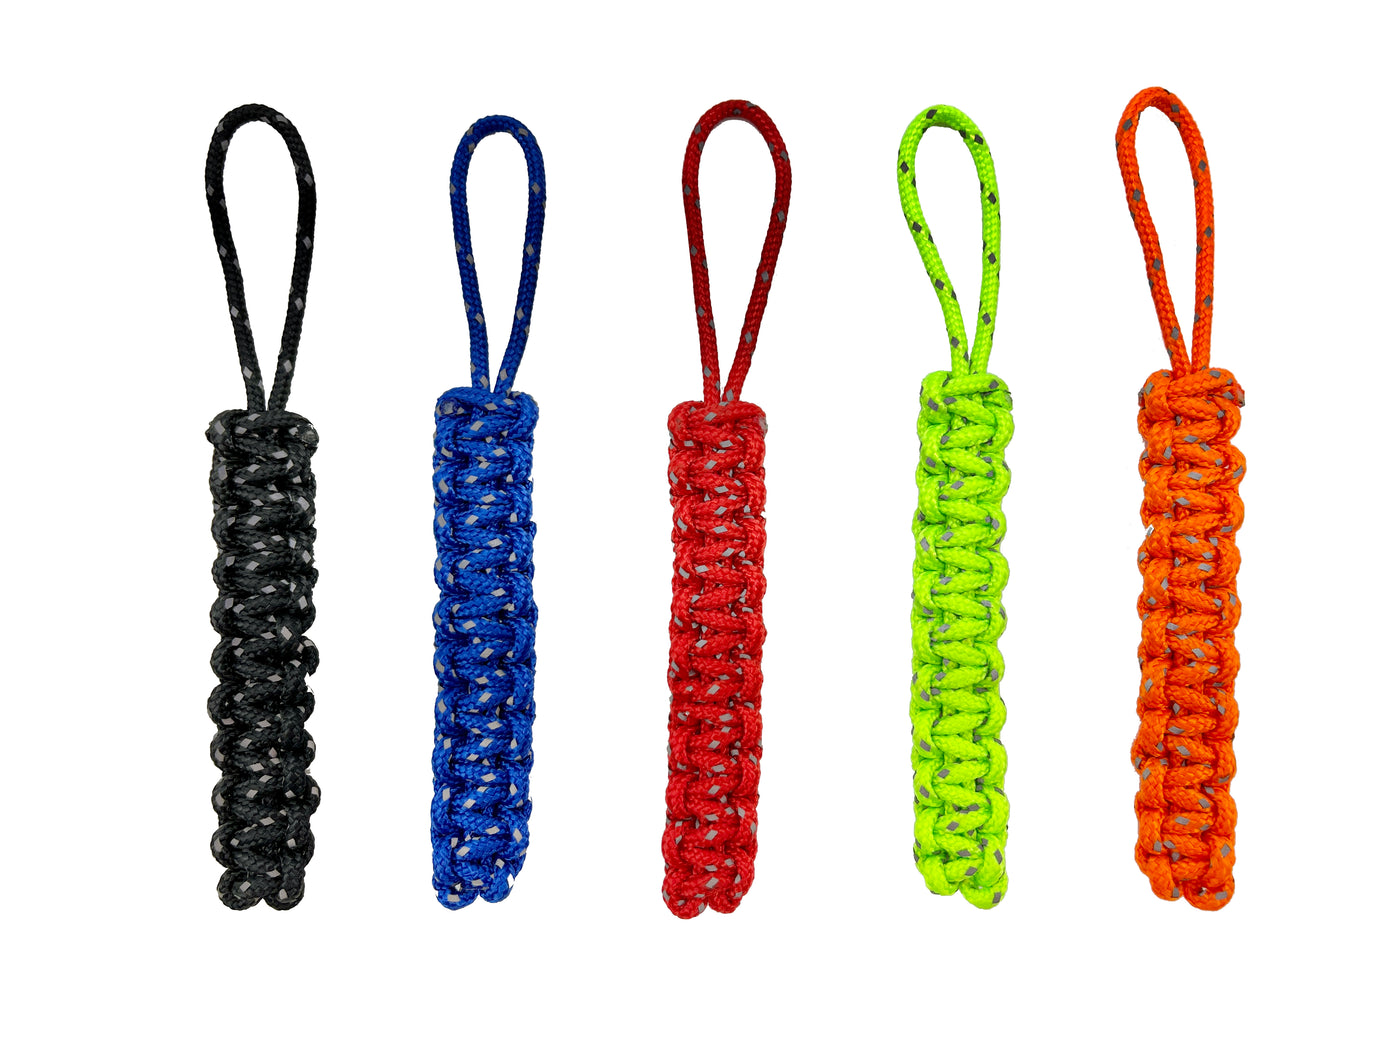 Paracord Reflective Red Zipper Pulls 5 Pack